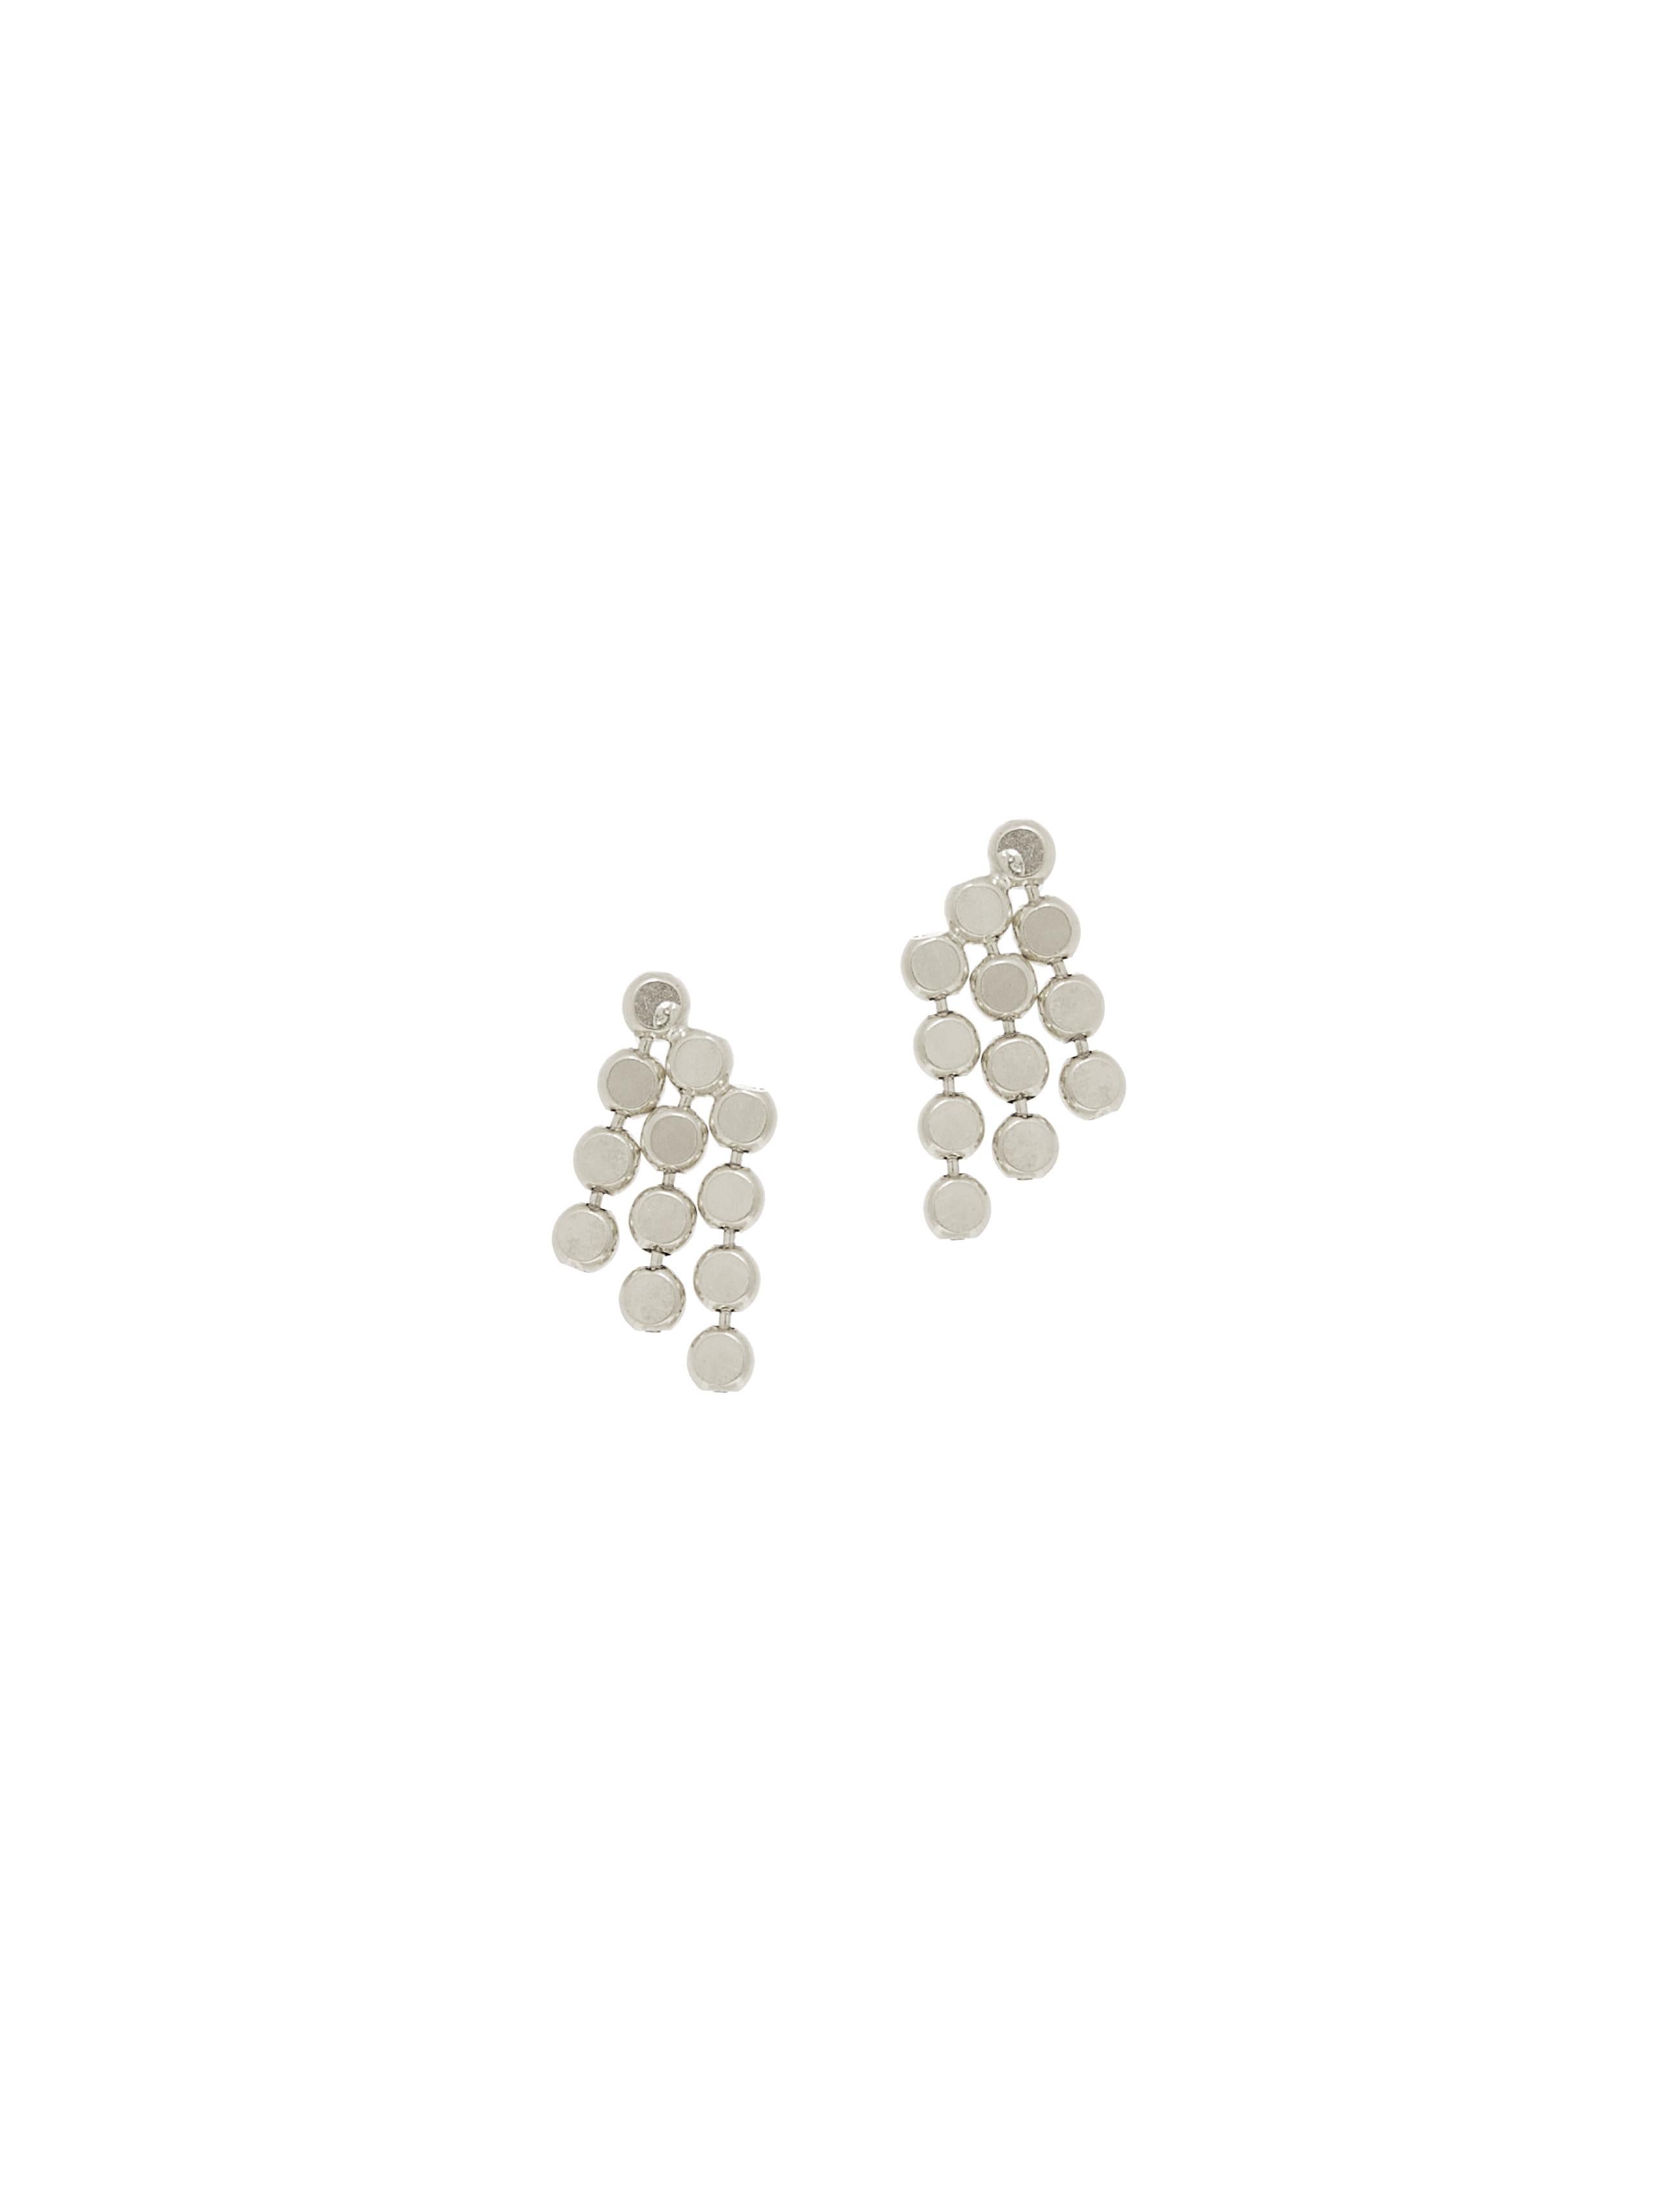 Contemporary Earrings Studs Round Chain Minimal Short 18K Gold-Plated Silver Greek Earrings For Sale